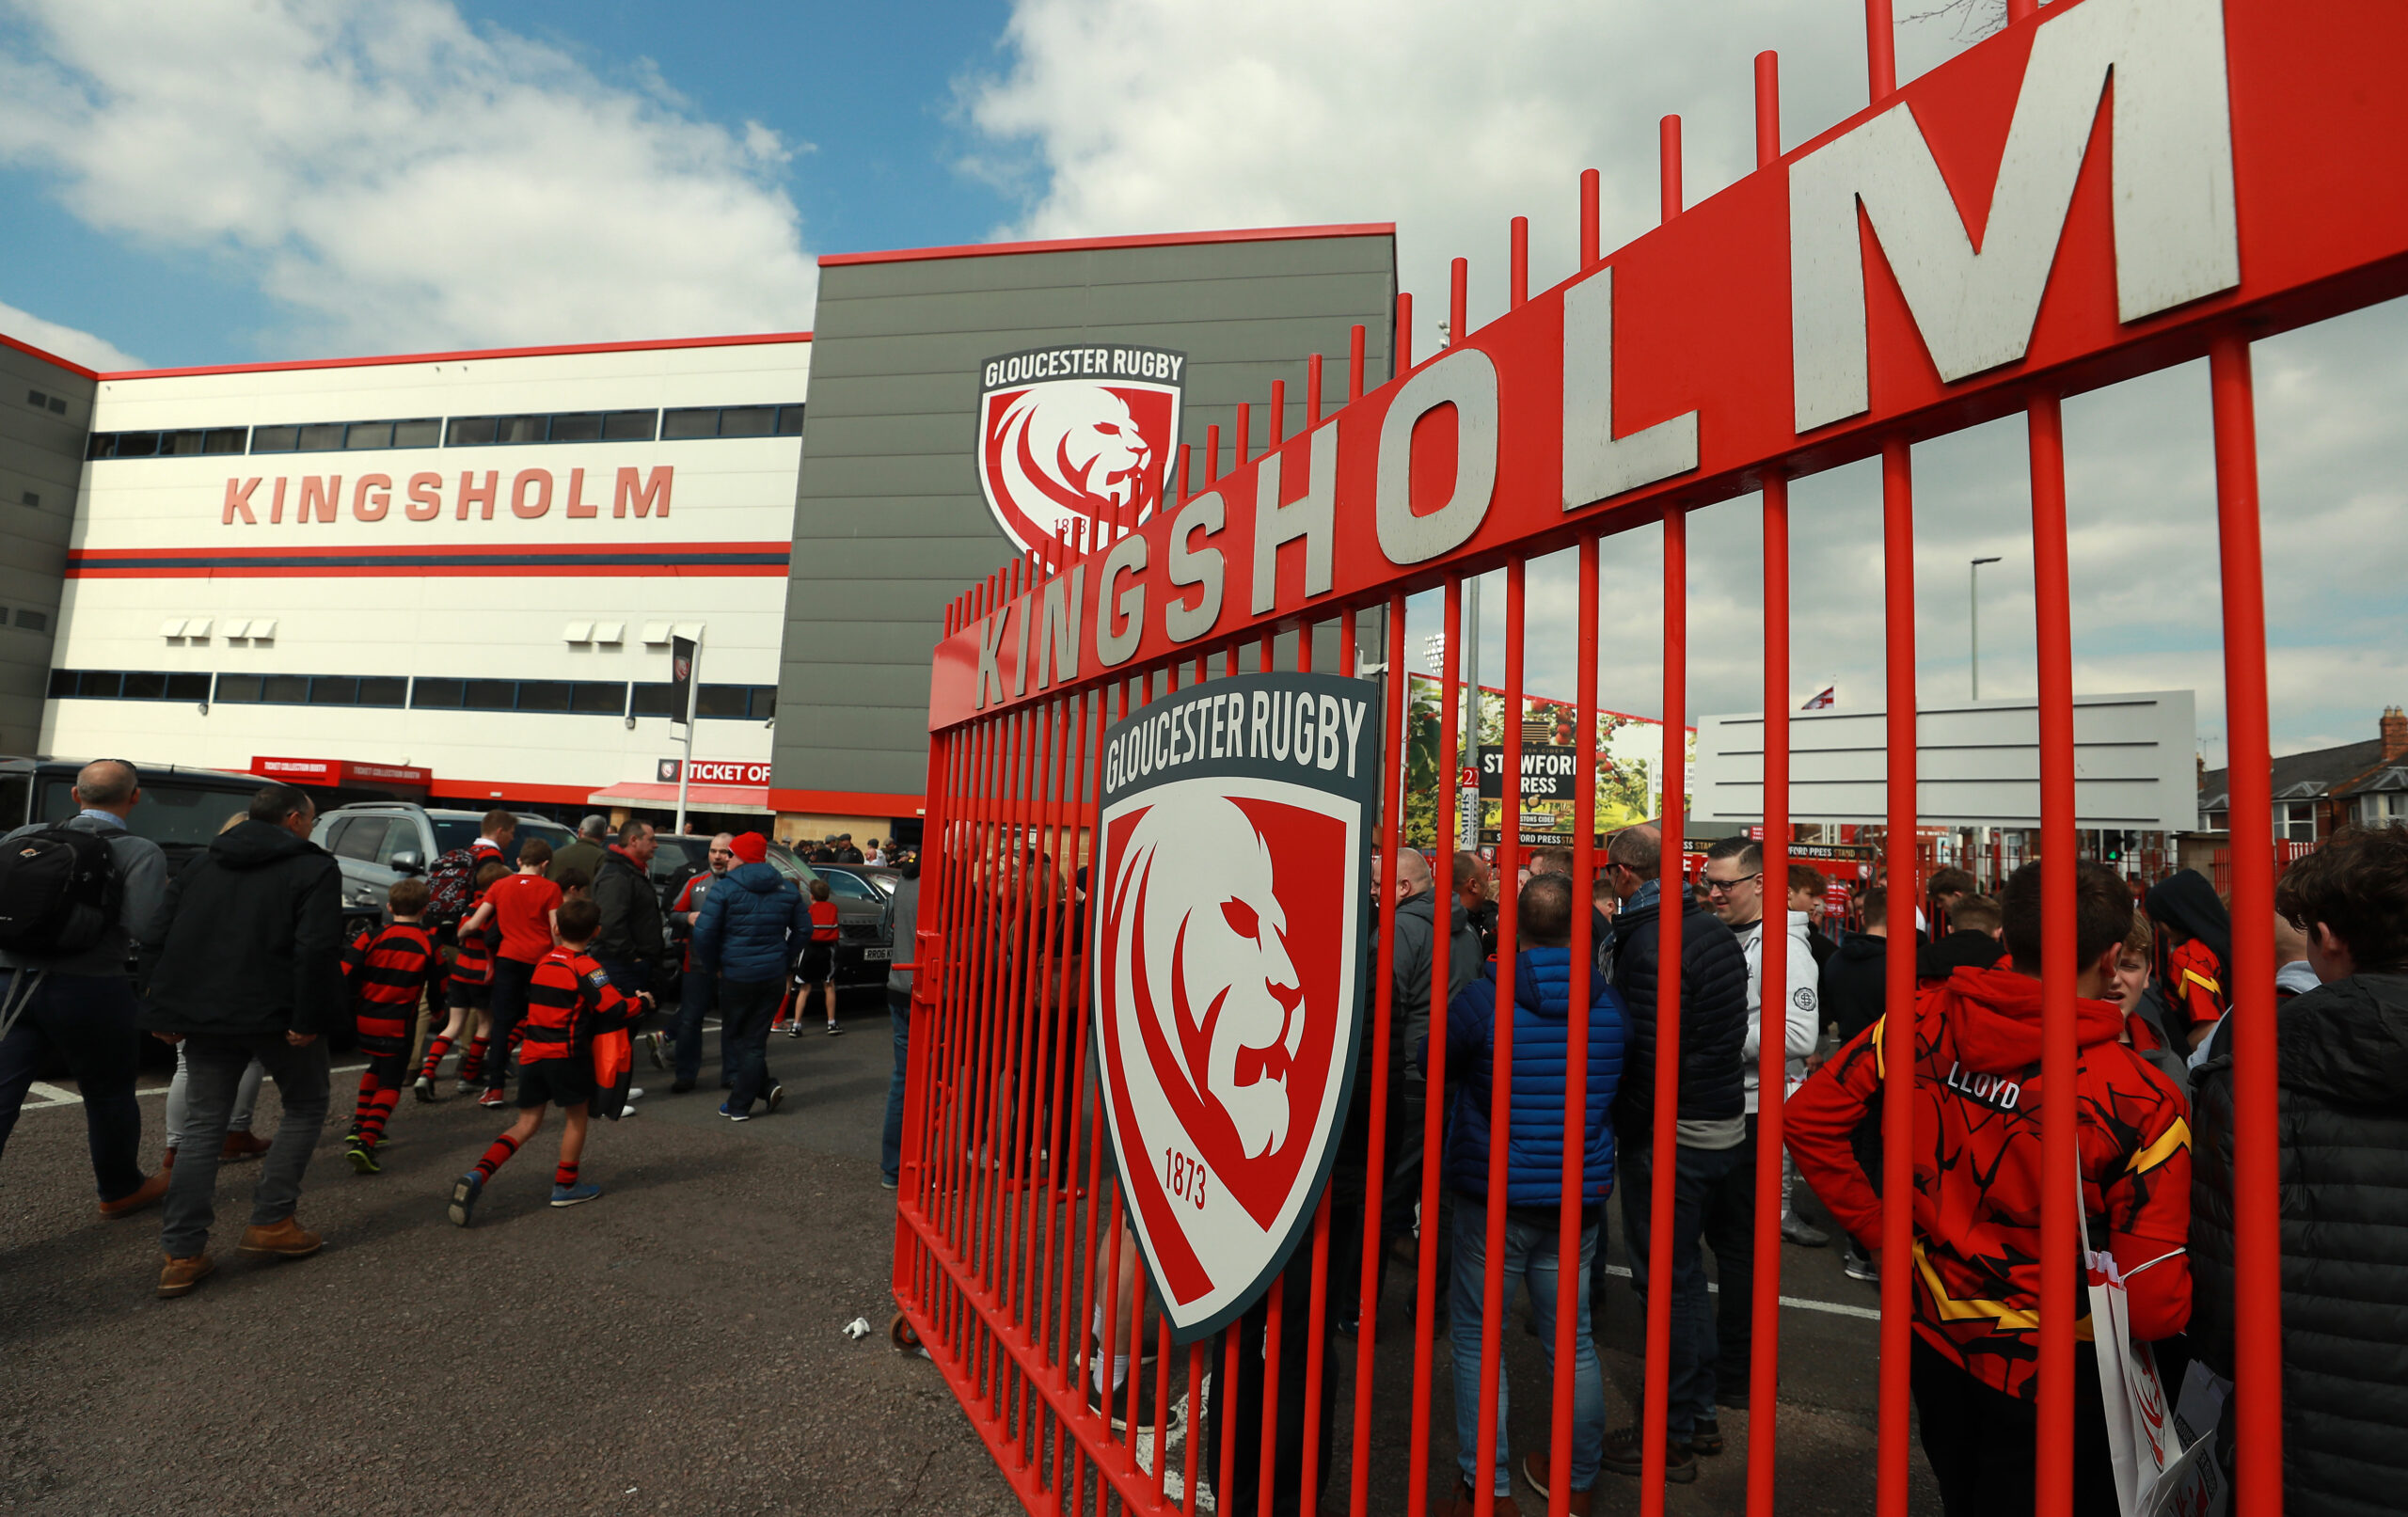 Gloucester Rugby appoint PTI to deliver Digital Transformation Strategy